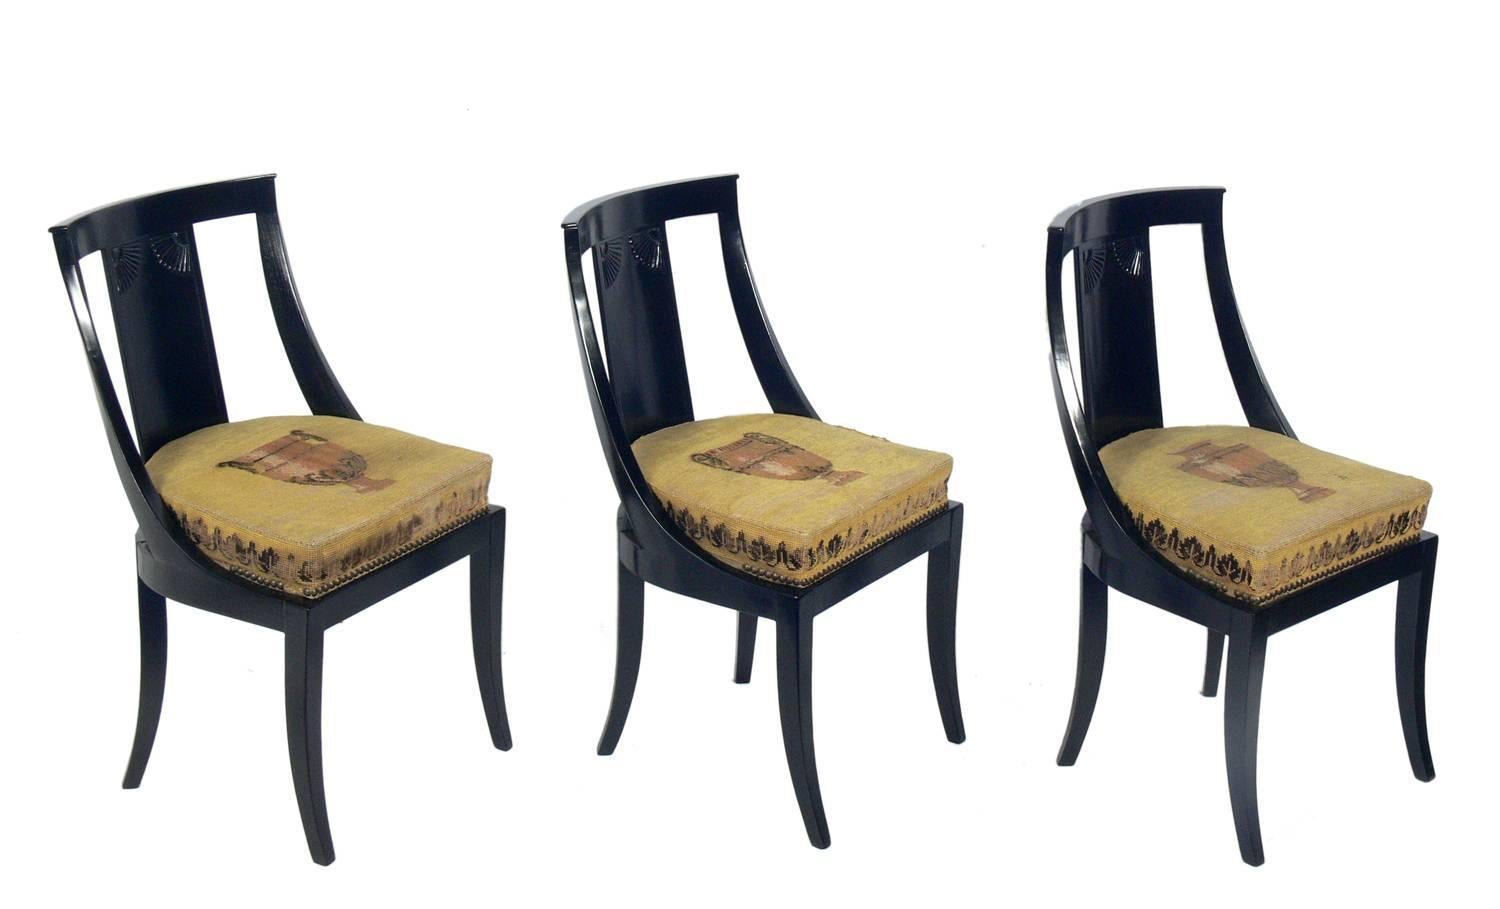 Set of six Art Deco dining chairs, French, circa 1920s. They have been refinished in a black lacquer finish and retain their original neoclassical needlepoint seats. The seats have considerable wear, and can be used as is, if you appreciate the